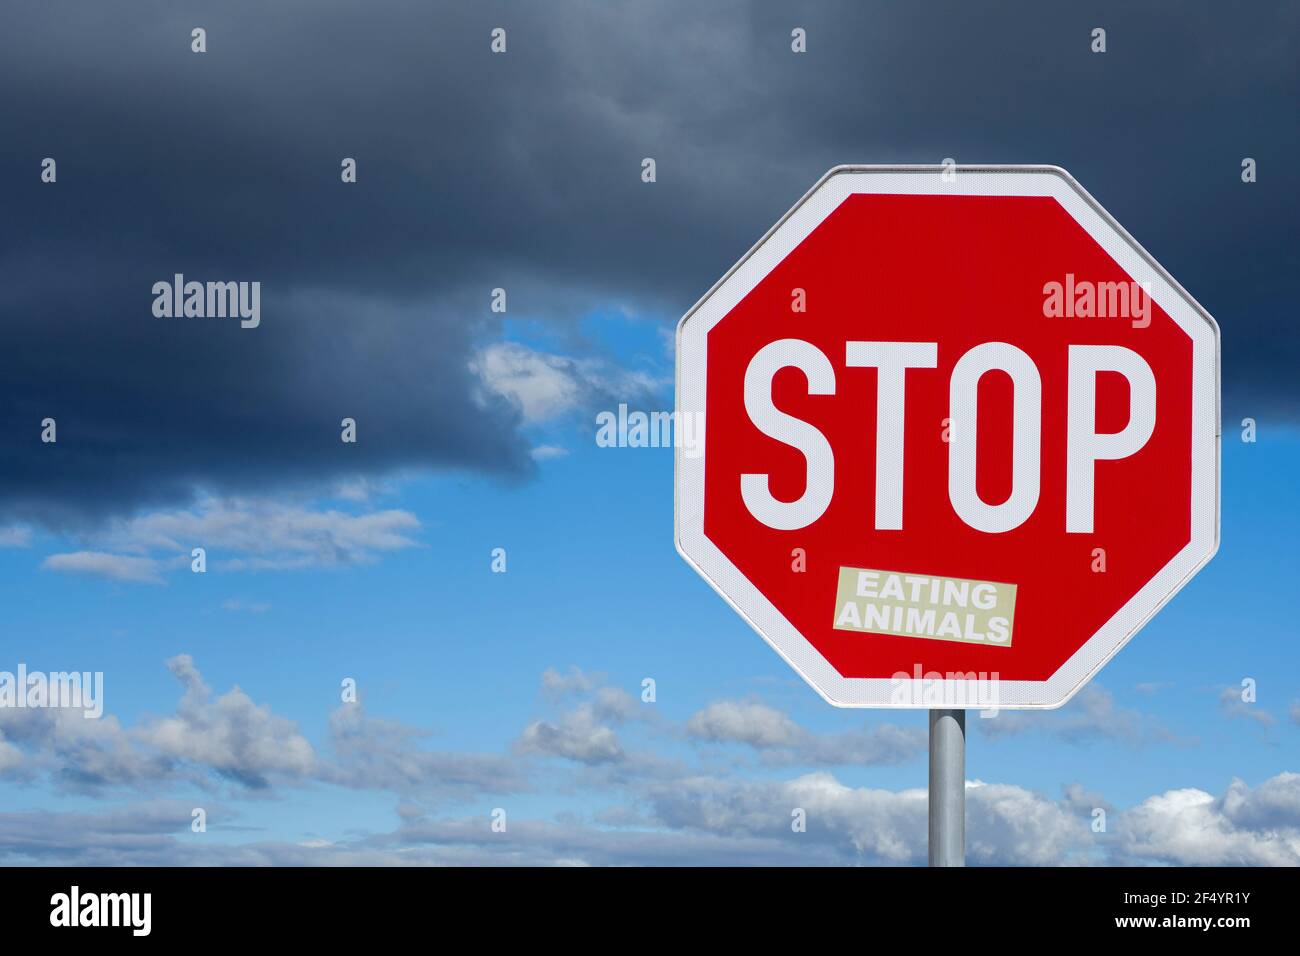 Road sign, Stop sign with sticker „eating animals“, sky with dark clouds, symbolic picture for stopping eating animals, Stock Photo